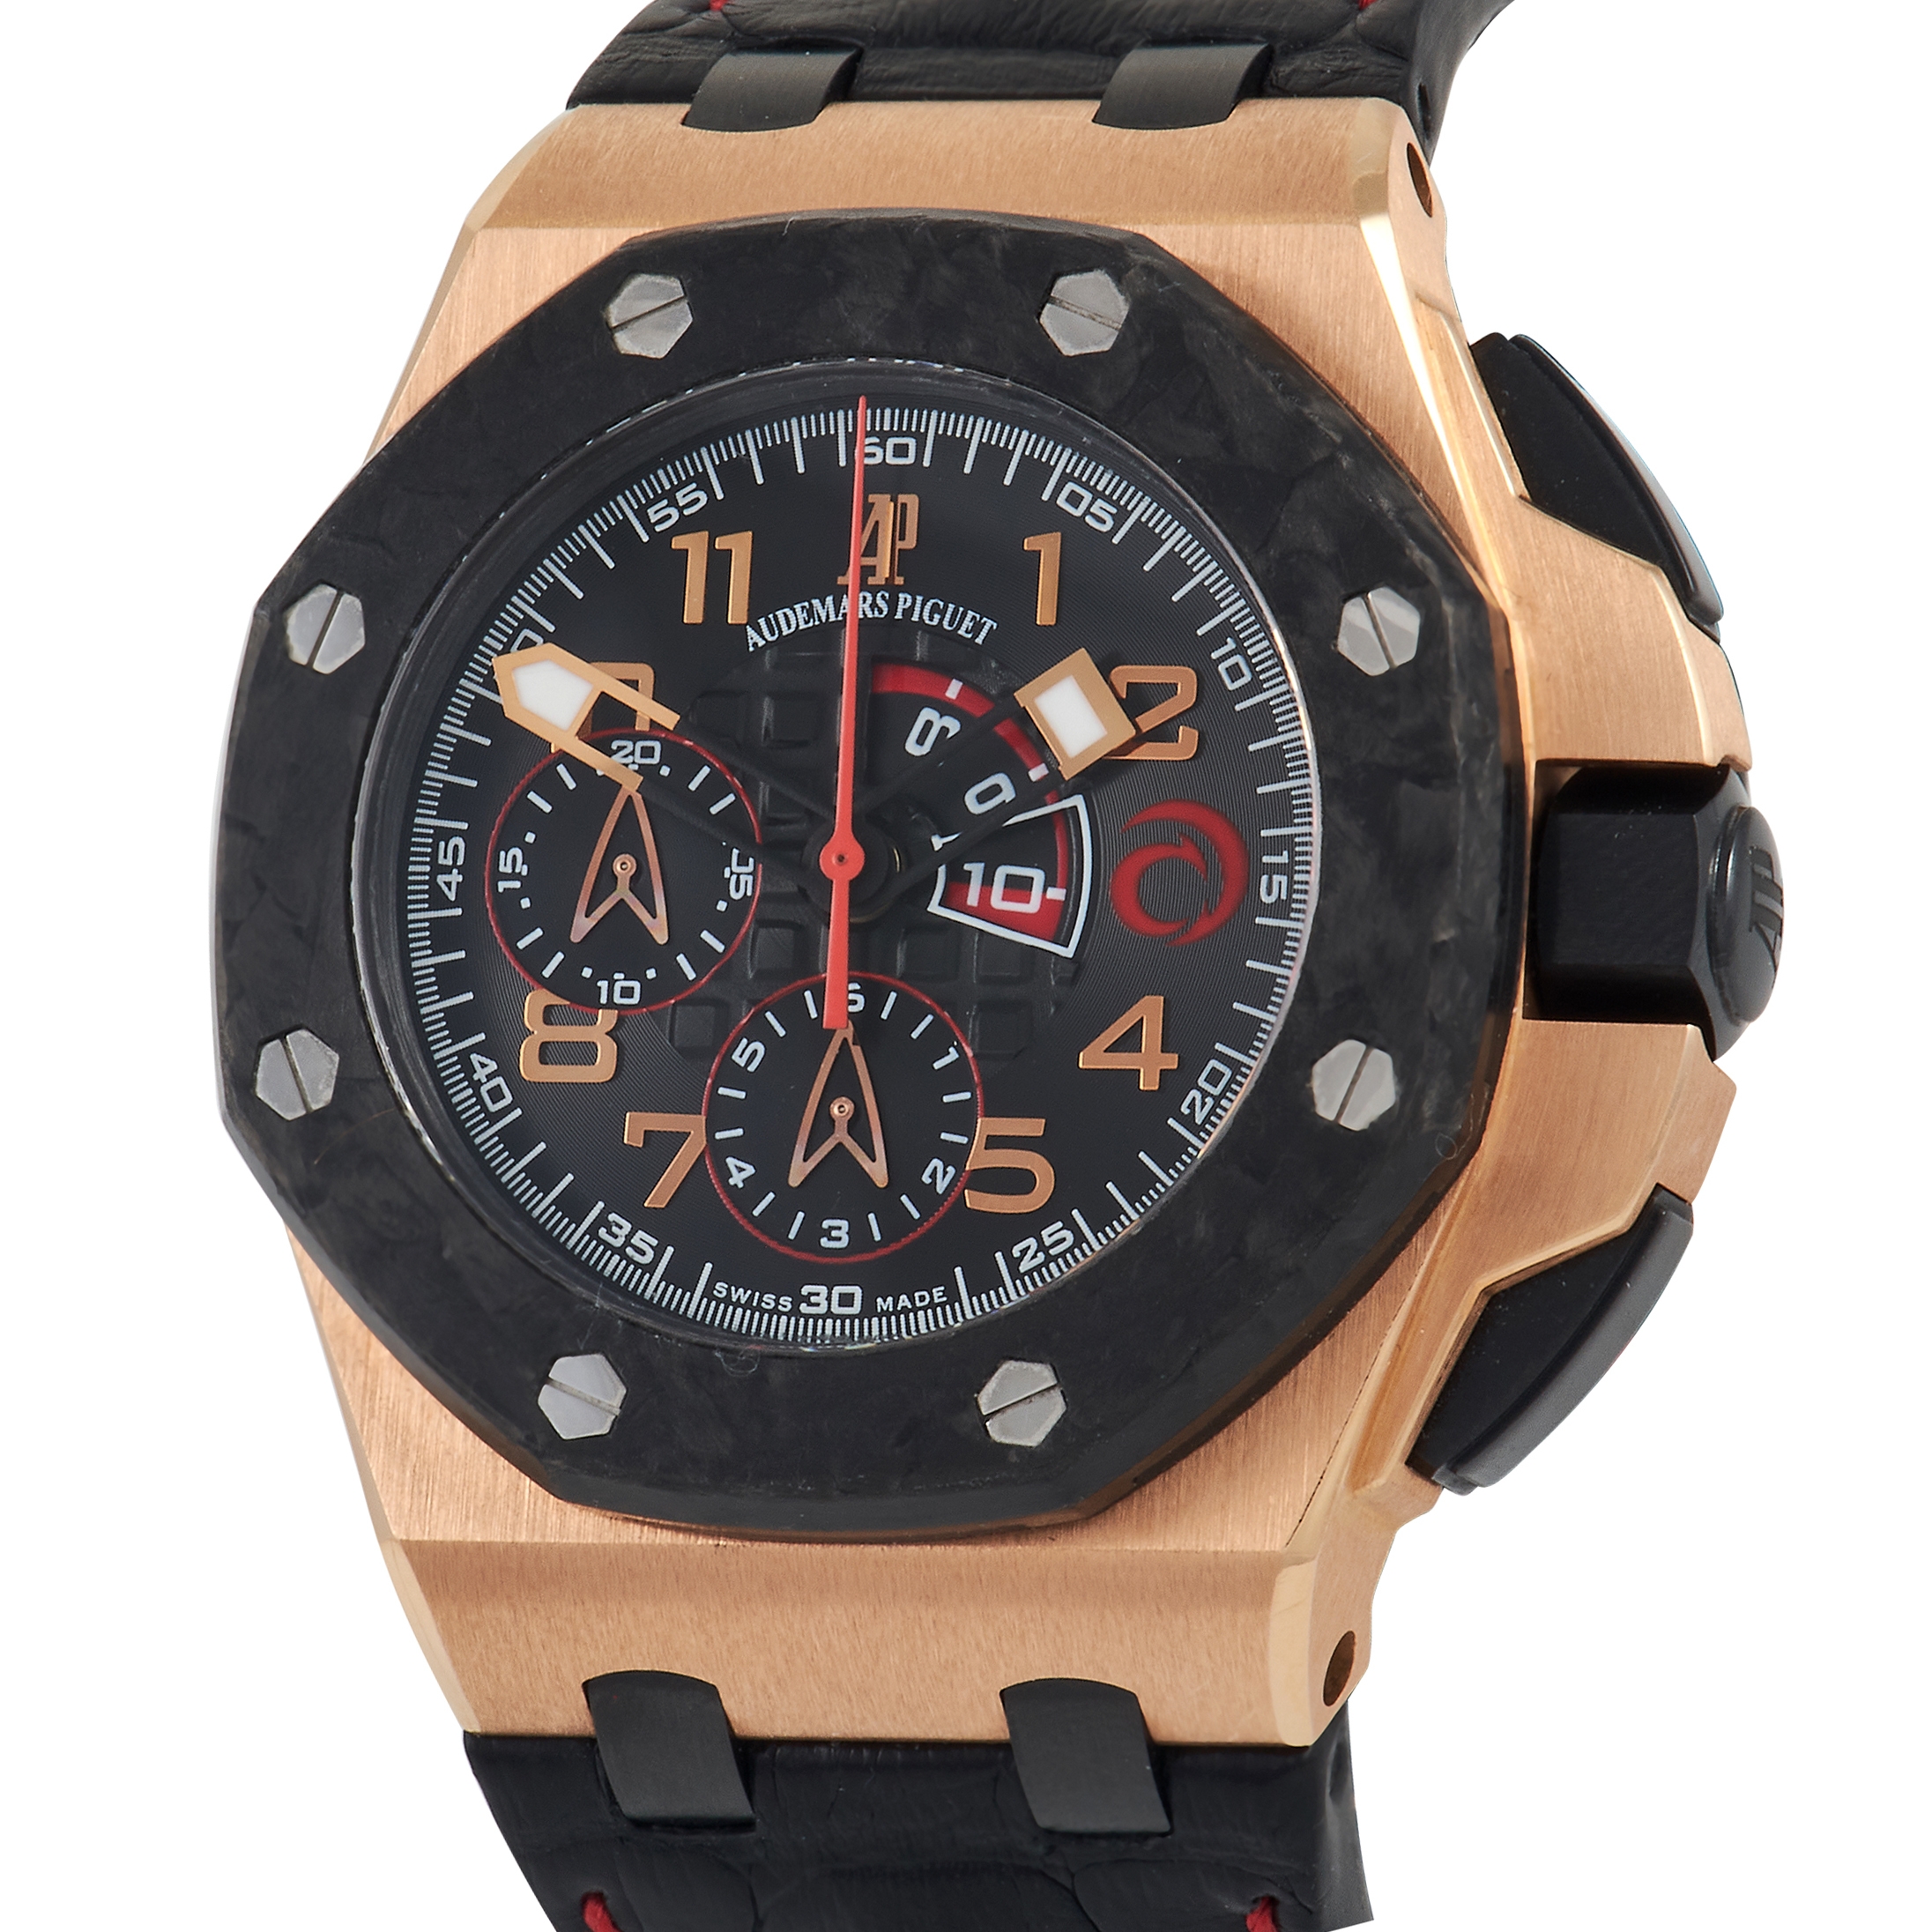 Audemars Piguet Royal Oak Offshore Chronograph Alinghi Team Limited Edition Watch 26062OR.OO.A002CA.01